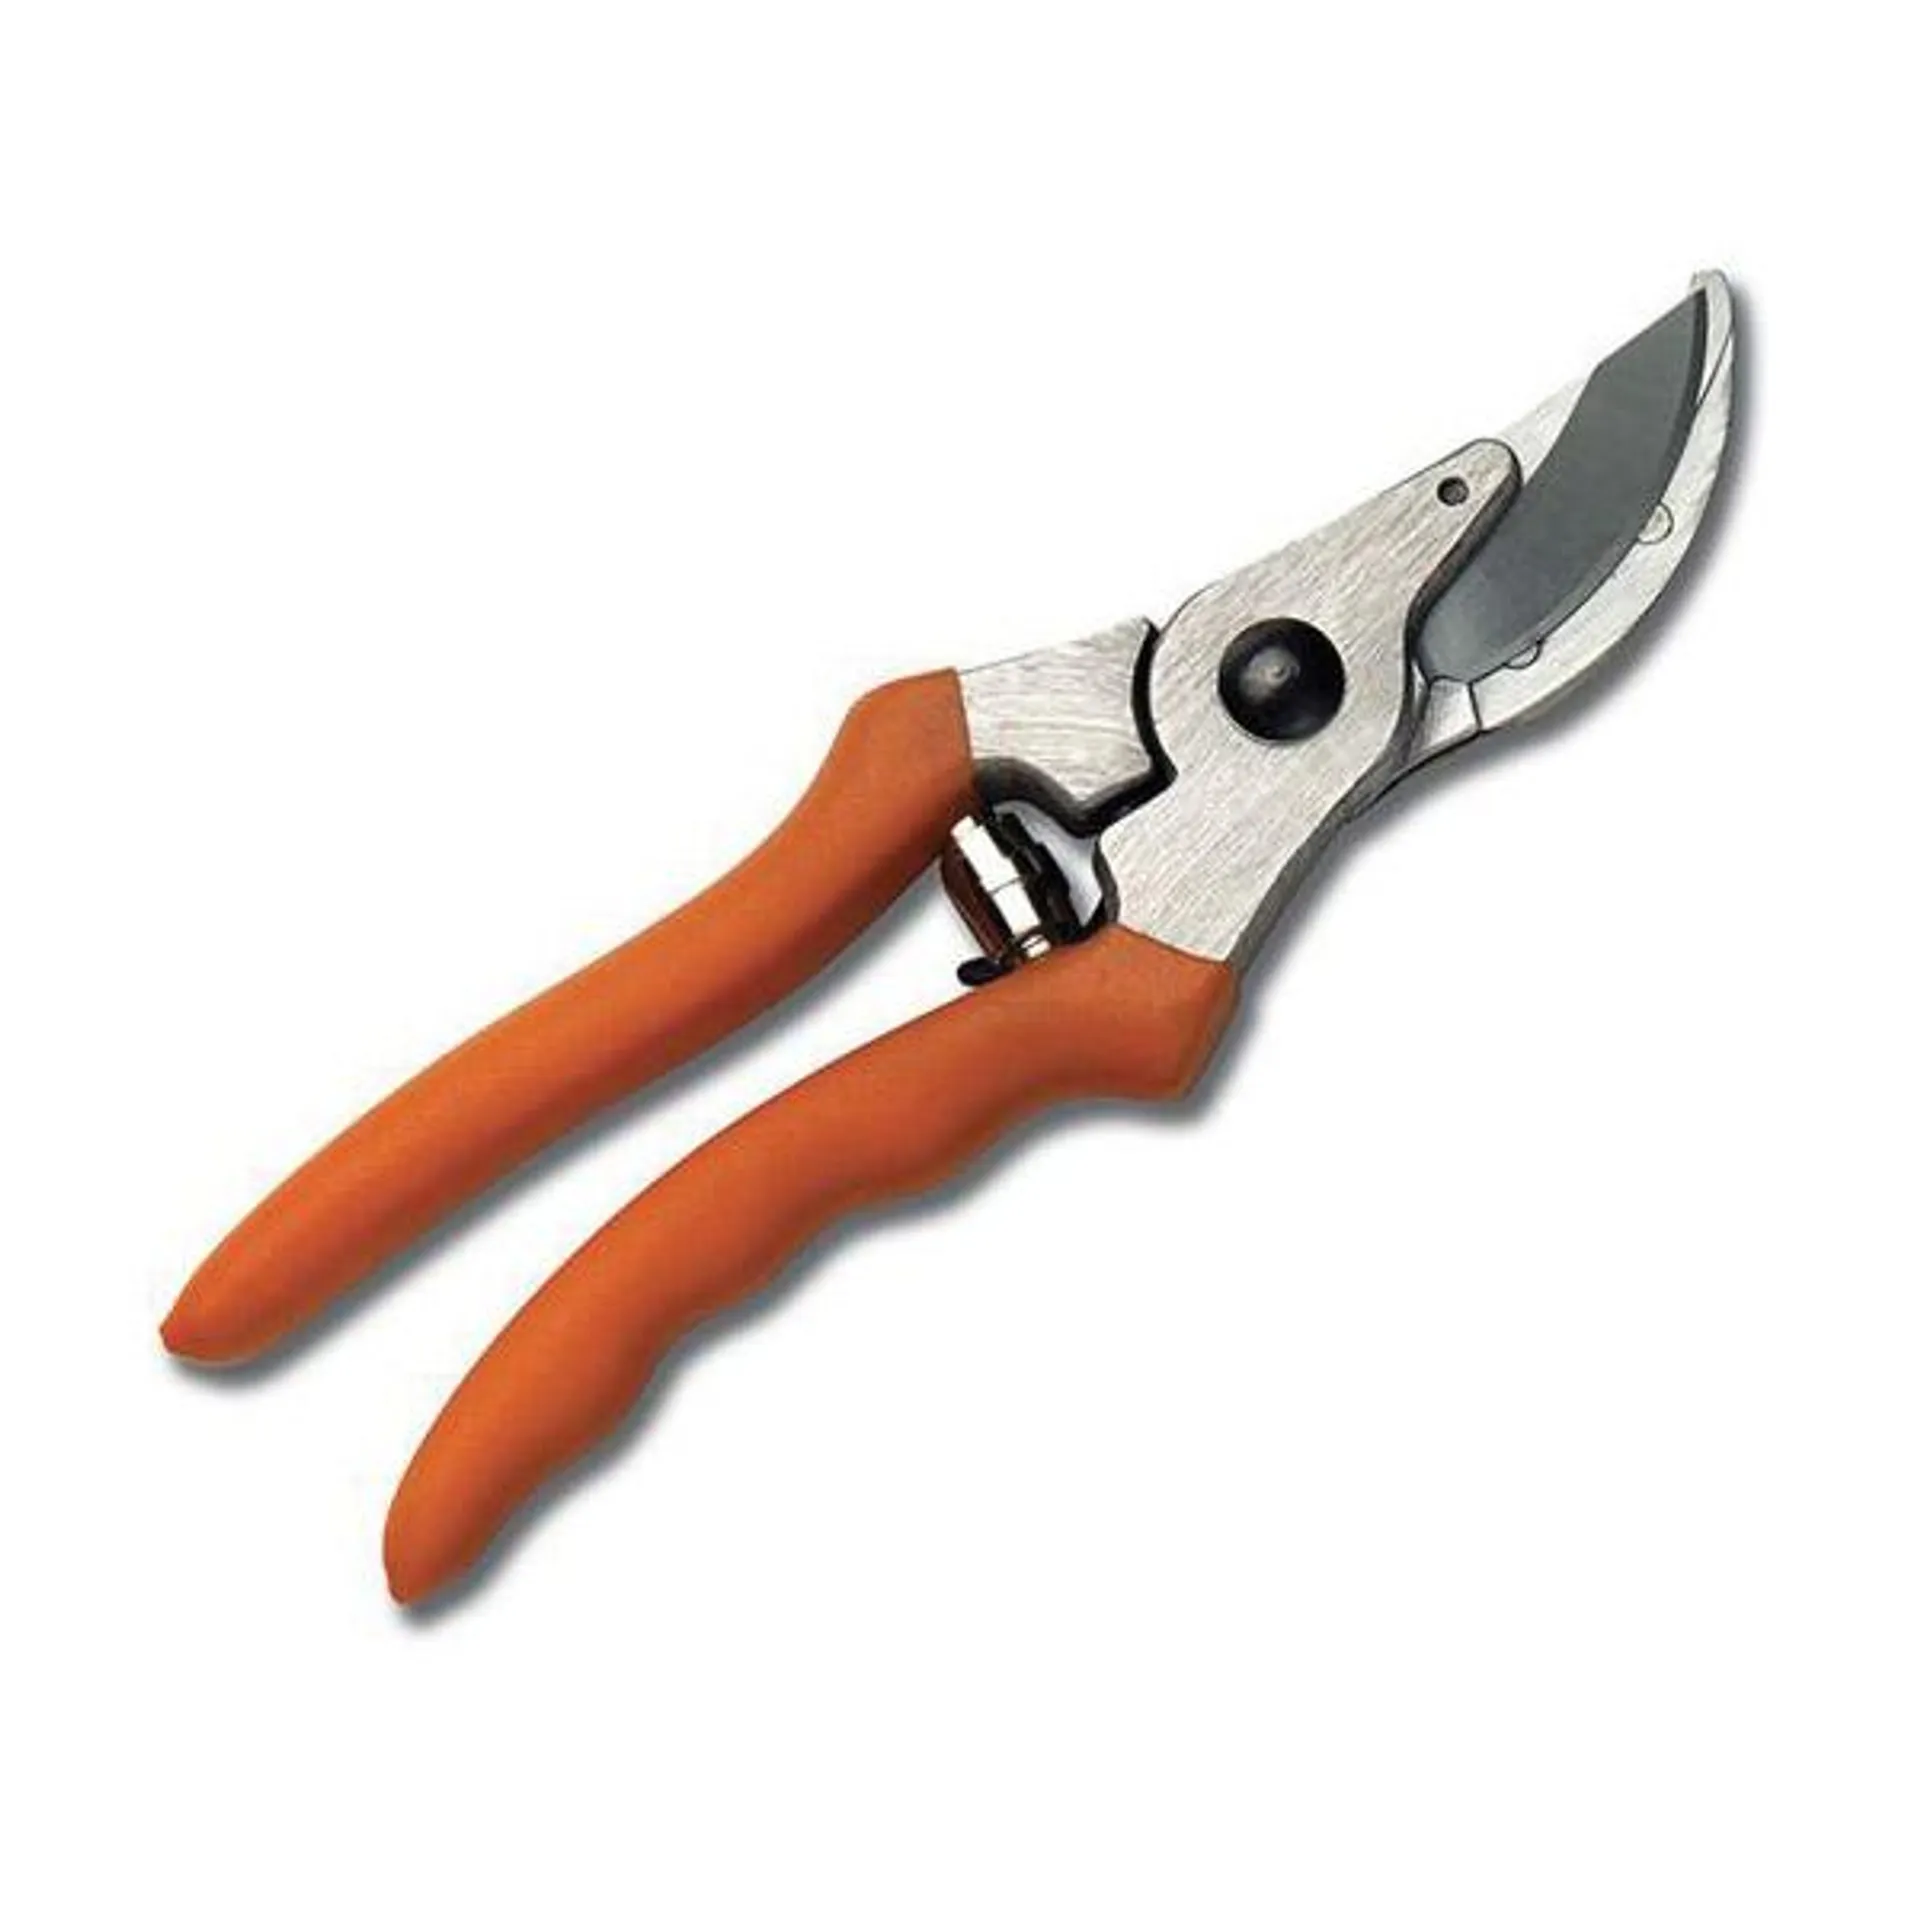 PP 10 Lightweight Hand Pruner, 0.8 in Cutting Capacity, Replaceable, Straight Blade